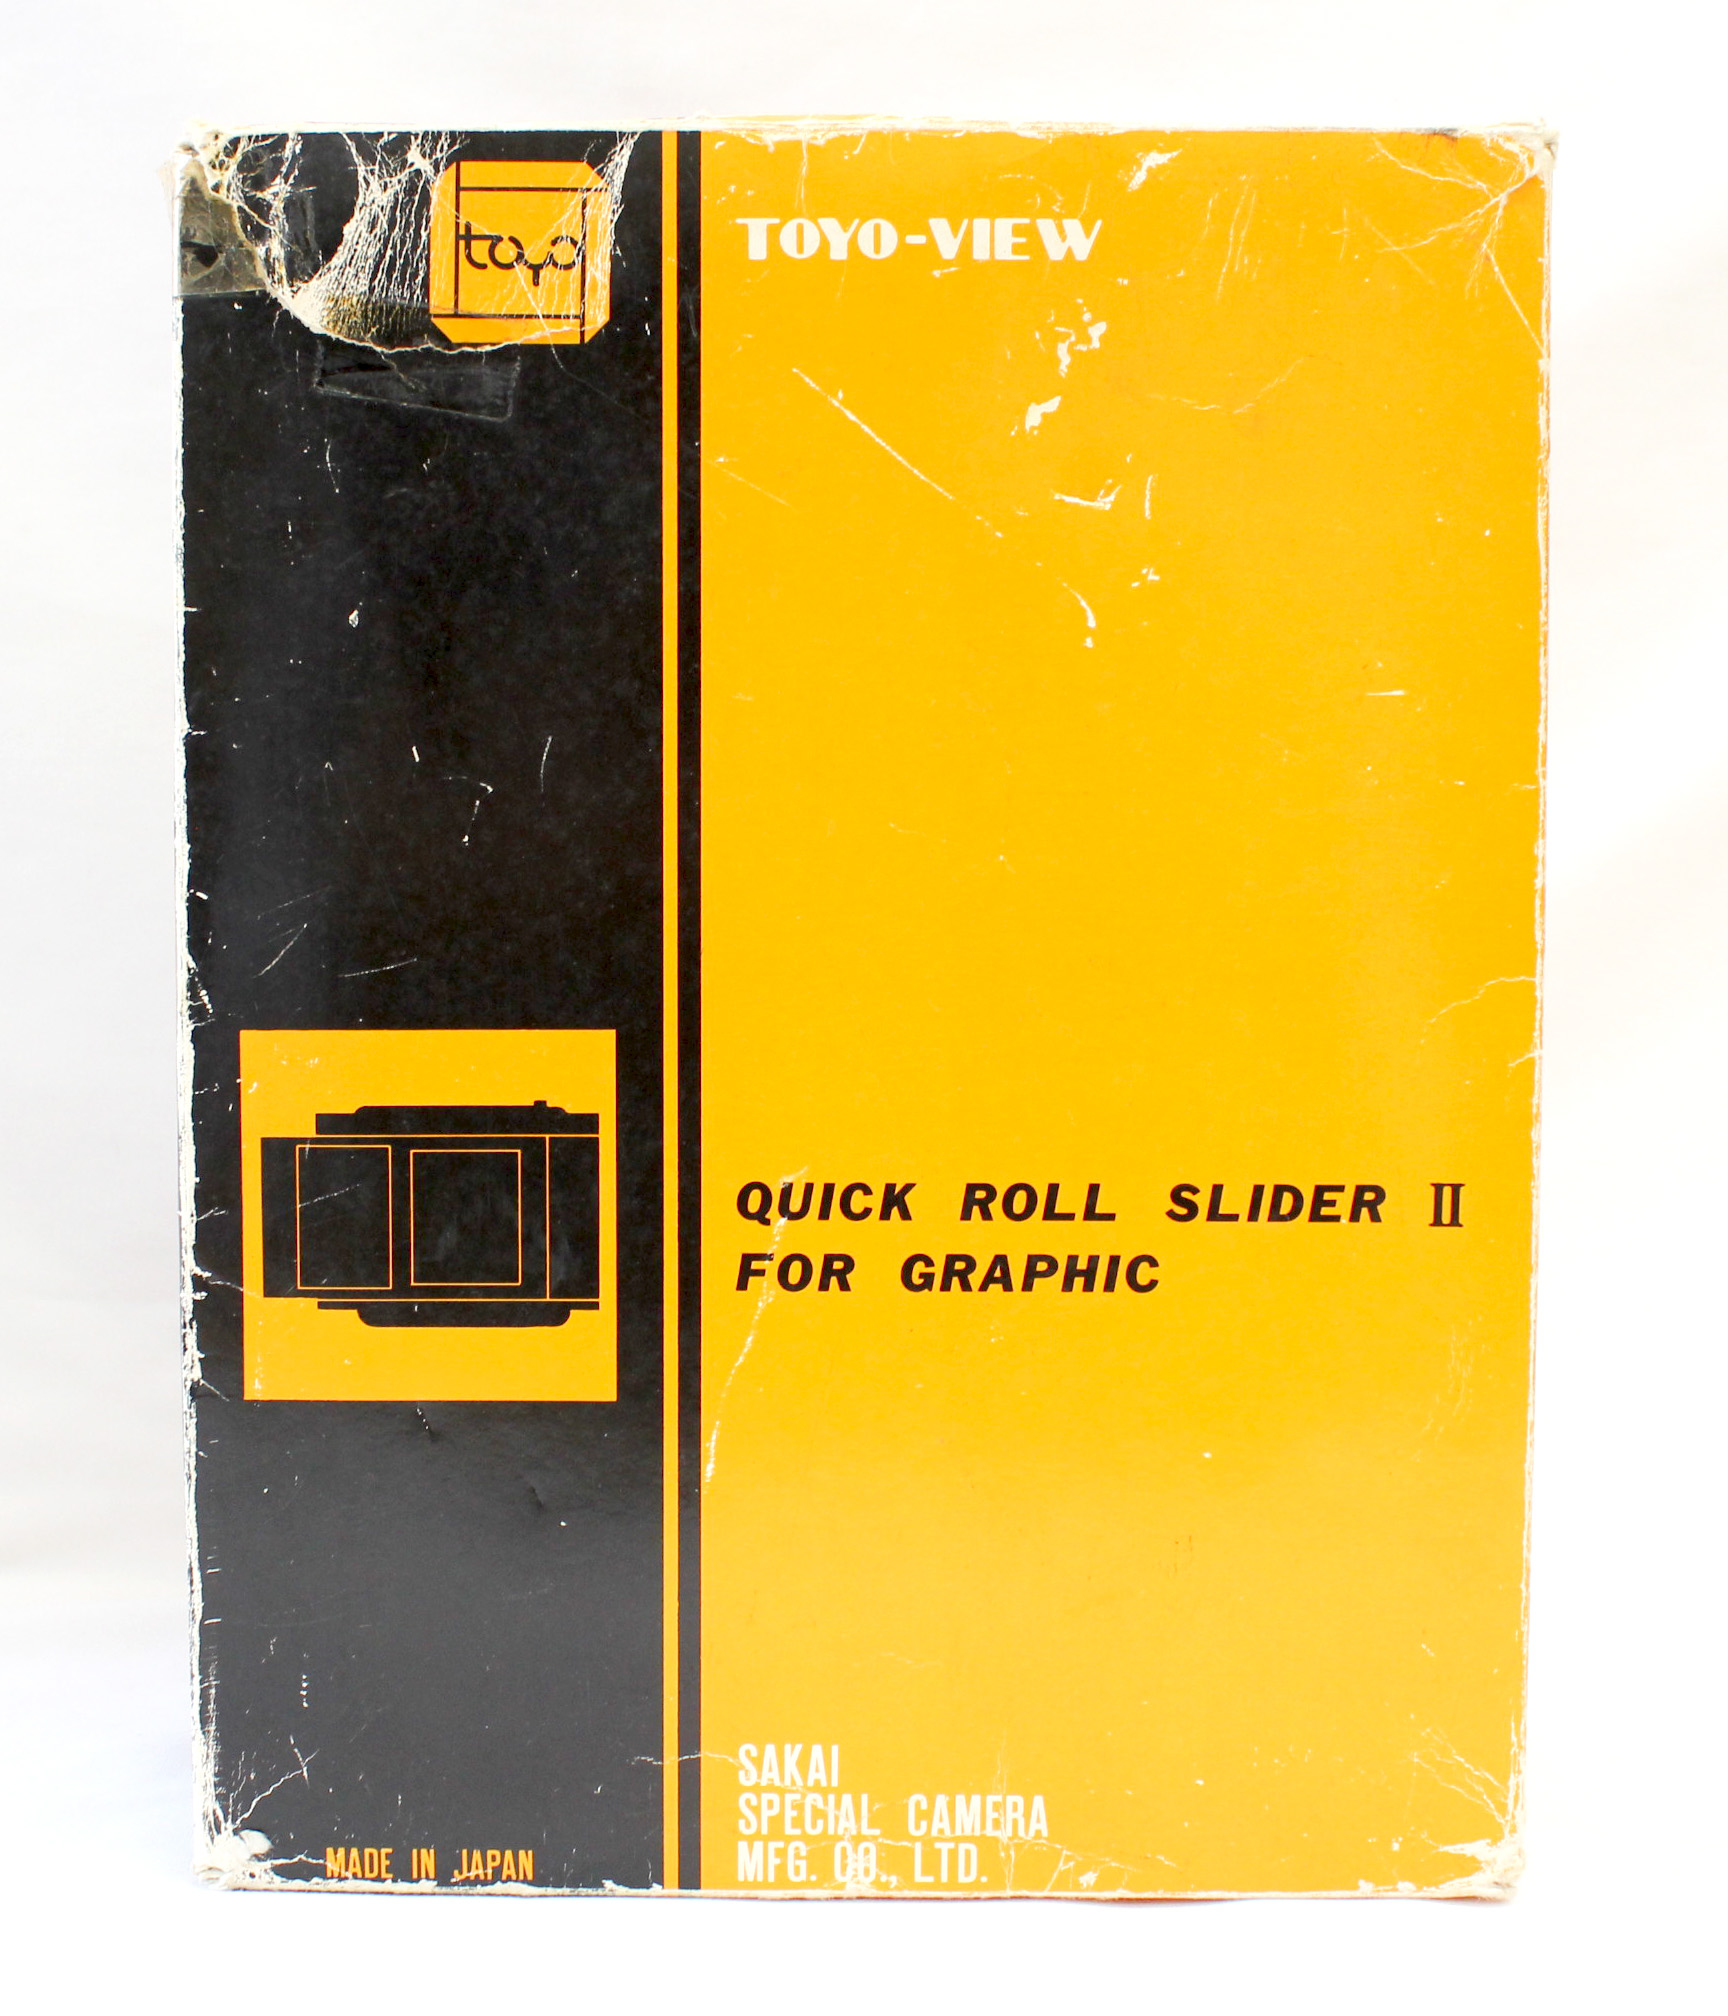 Toyo Toyo-View Quick Roll Slider II for Graphic No.1035 SG II 4V in Box from Japan Photo 9